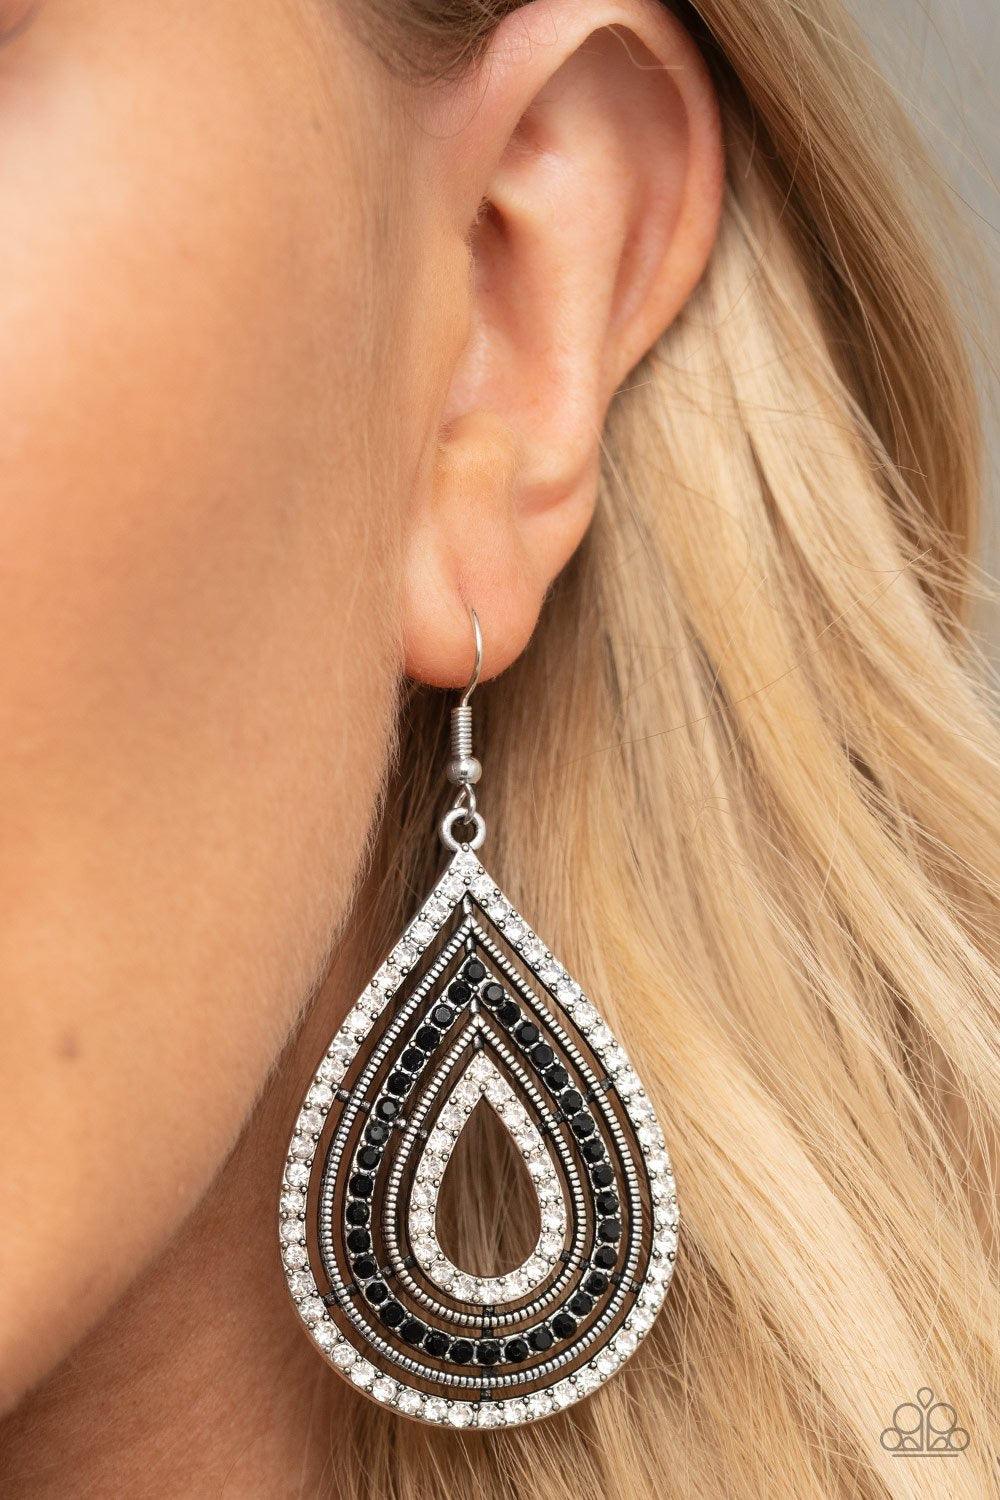 Paparazzi Accessories 5th Avenue Attraction - Black White and black rhinestones encrusted frames and textured silver frames alternate into a dramatic teardrop for a refined flair. Earring attaches to a standard fishhook fitting. Jewelry